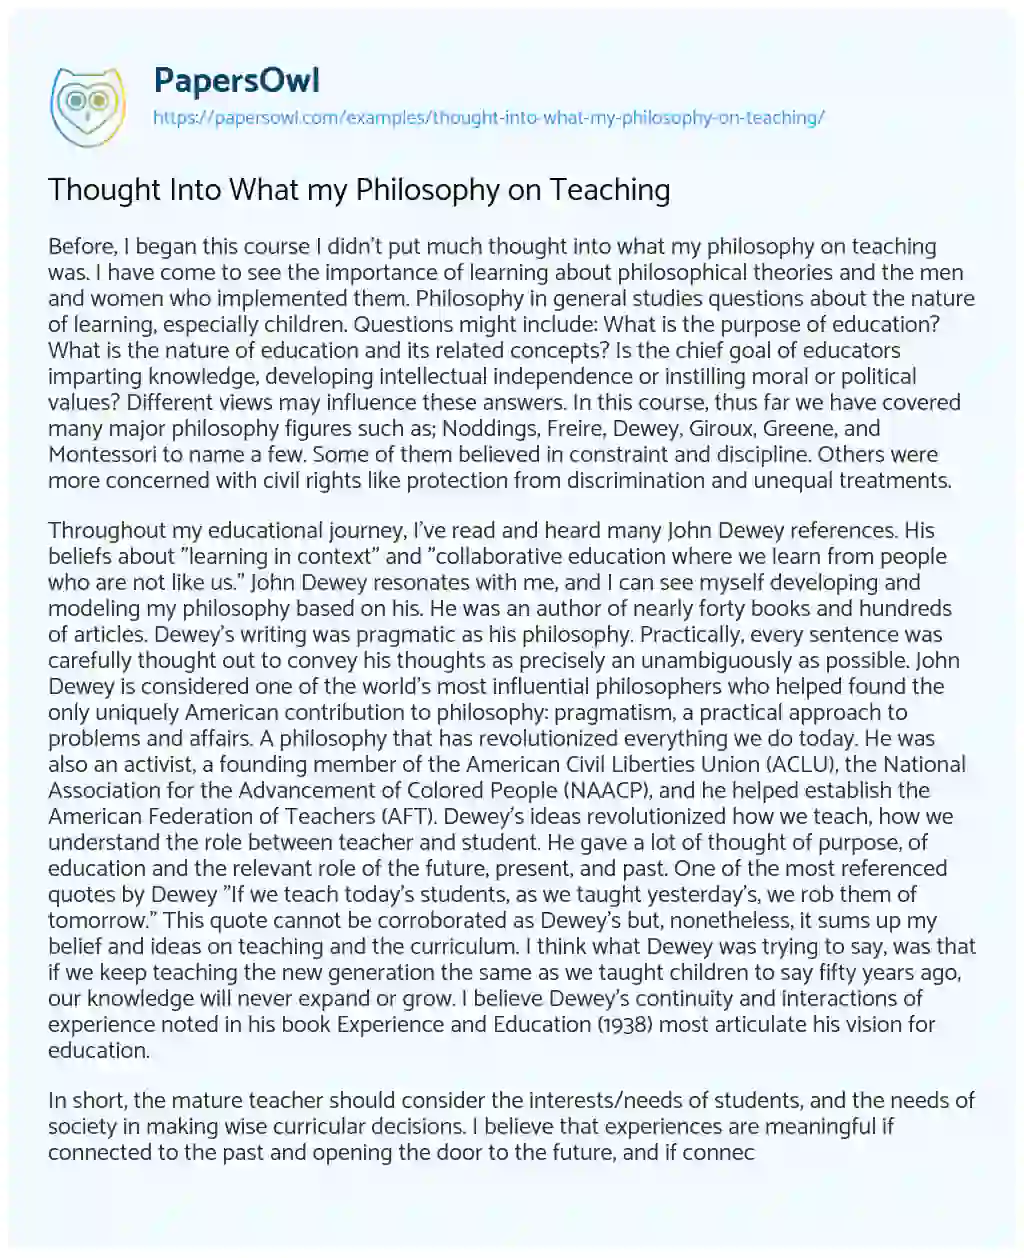 Essay on Thought into what my Philosophy on Teaching